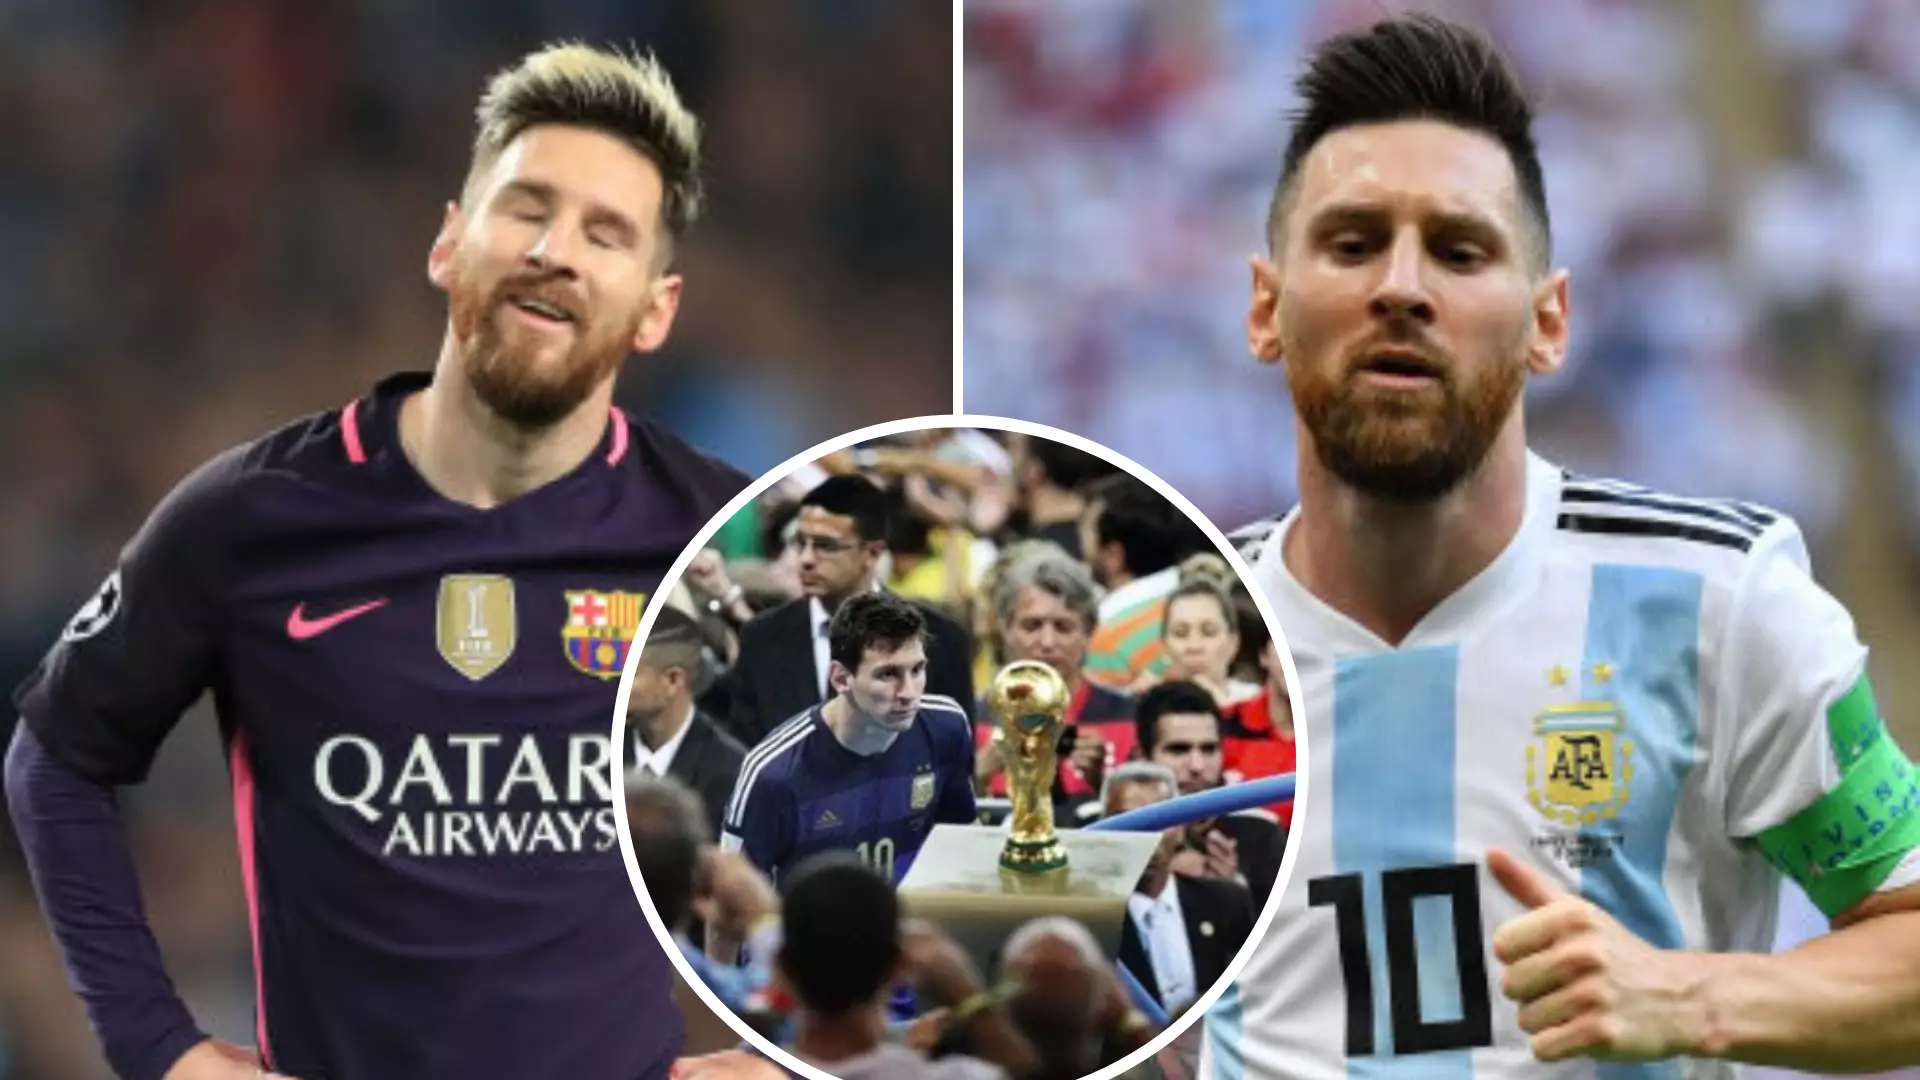 Fan’s Lionel Messi Thread Brands Him 'Overrated' And Explains Why 'He's Not The Greatest Of All Time'